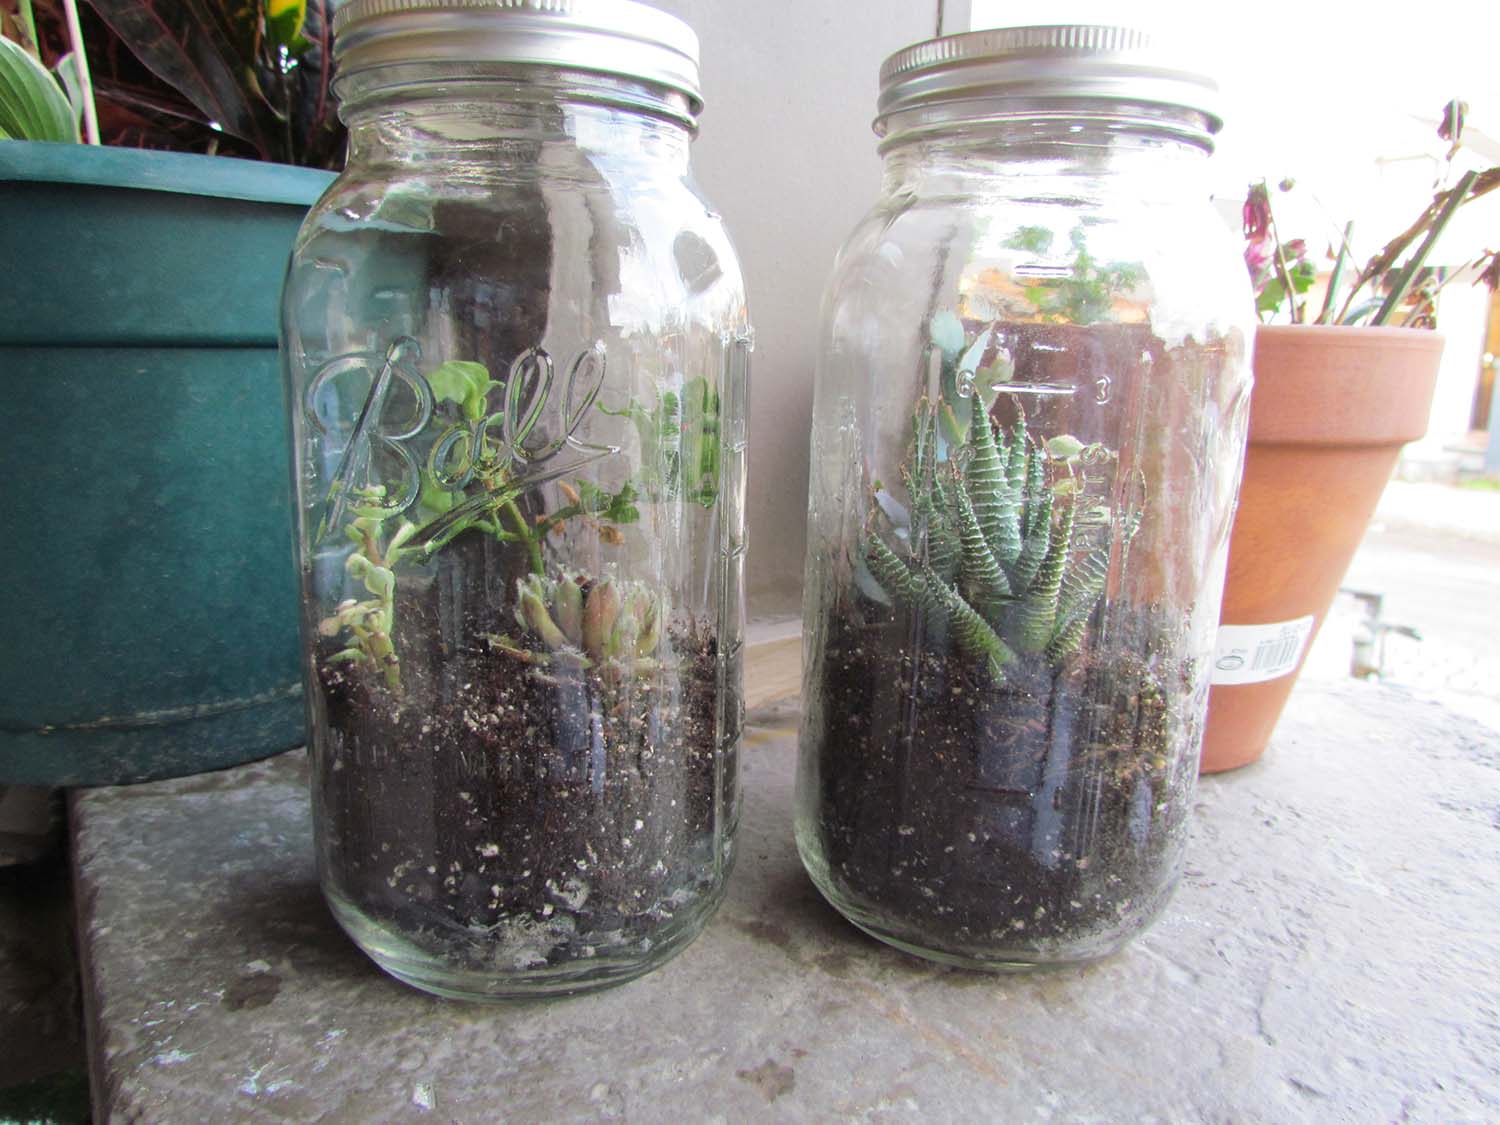 Do It Yourself A Ball Jar Terrarium New Orleans Area Habitat For Humanity,Creamy Chicken Slow Cooker Recipes